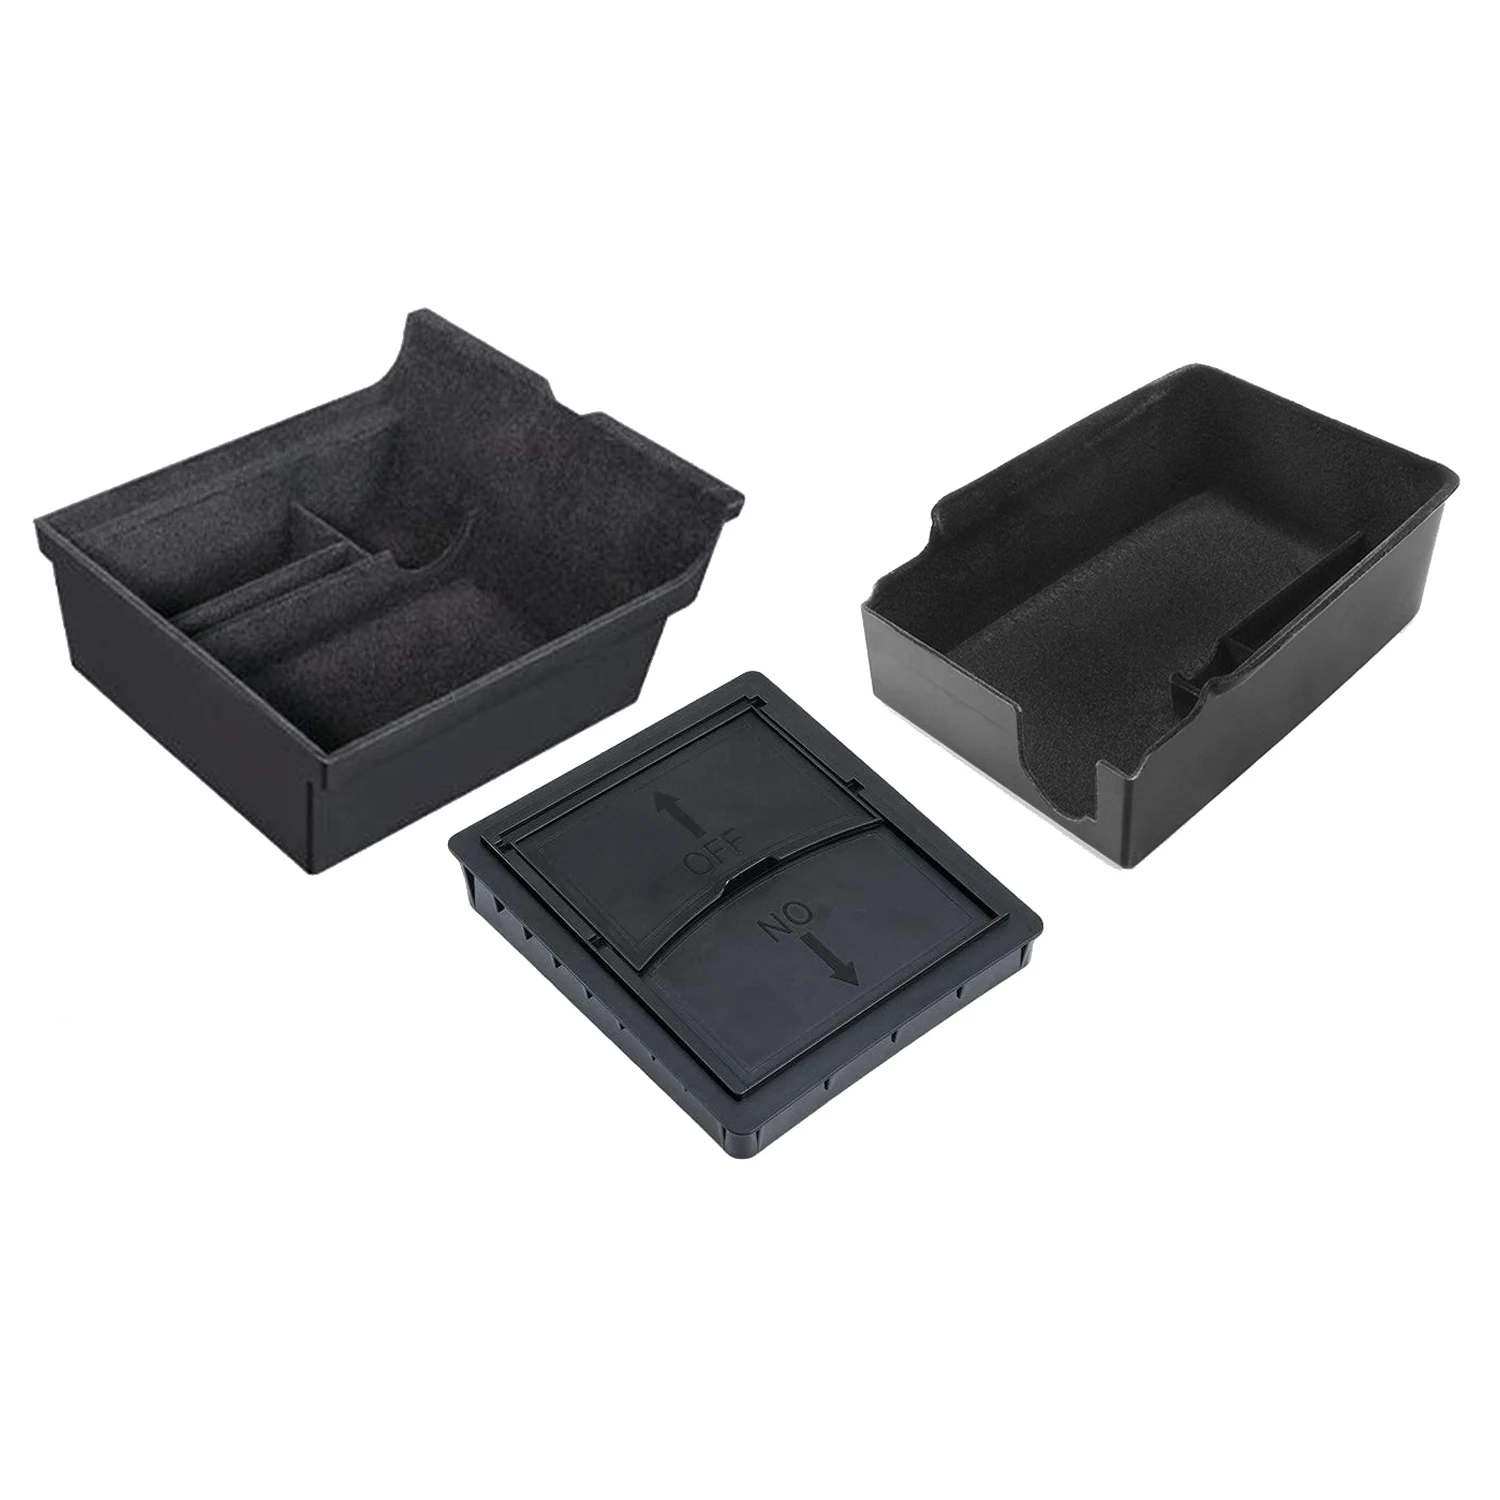 

3PCS Center Console Organizer Tray Fit for 2021 Tesla Model 3/Y Armrest Cubby Drawer Storage Box Accessories (Flocking)